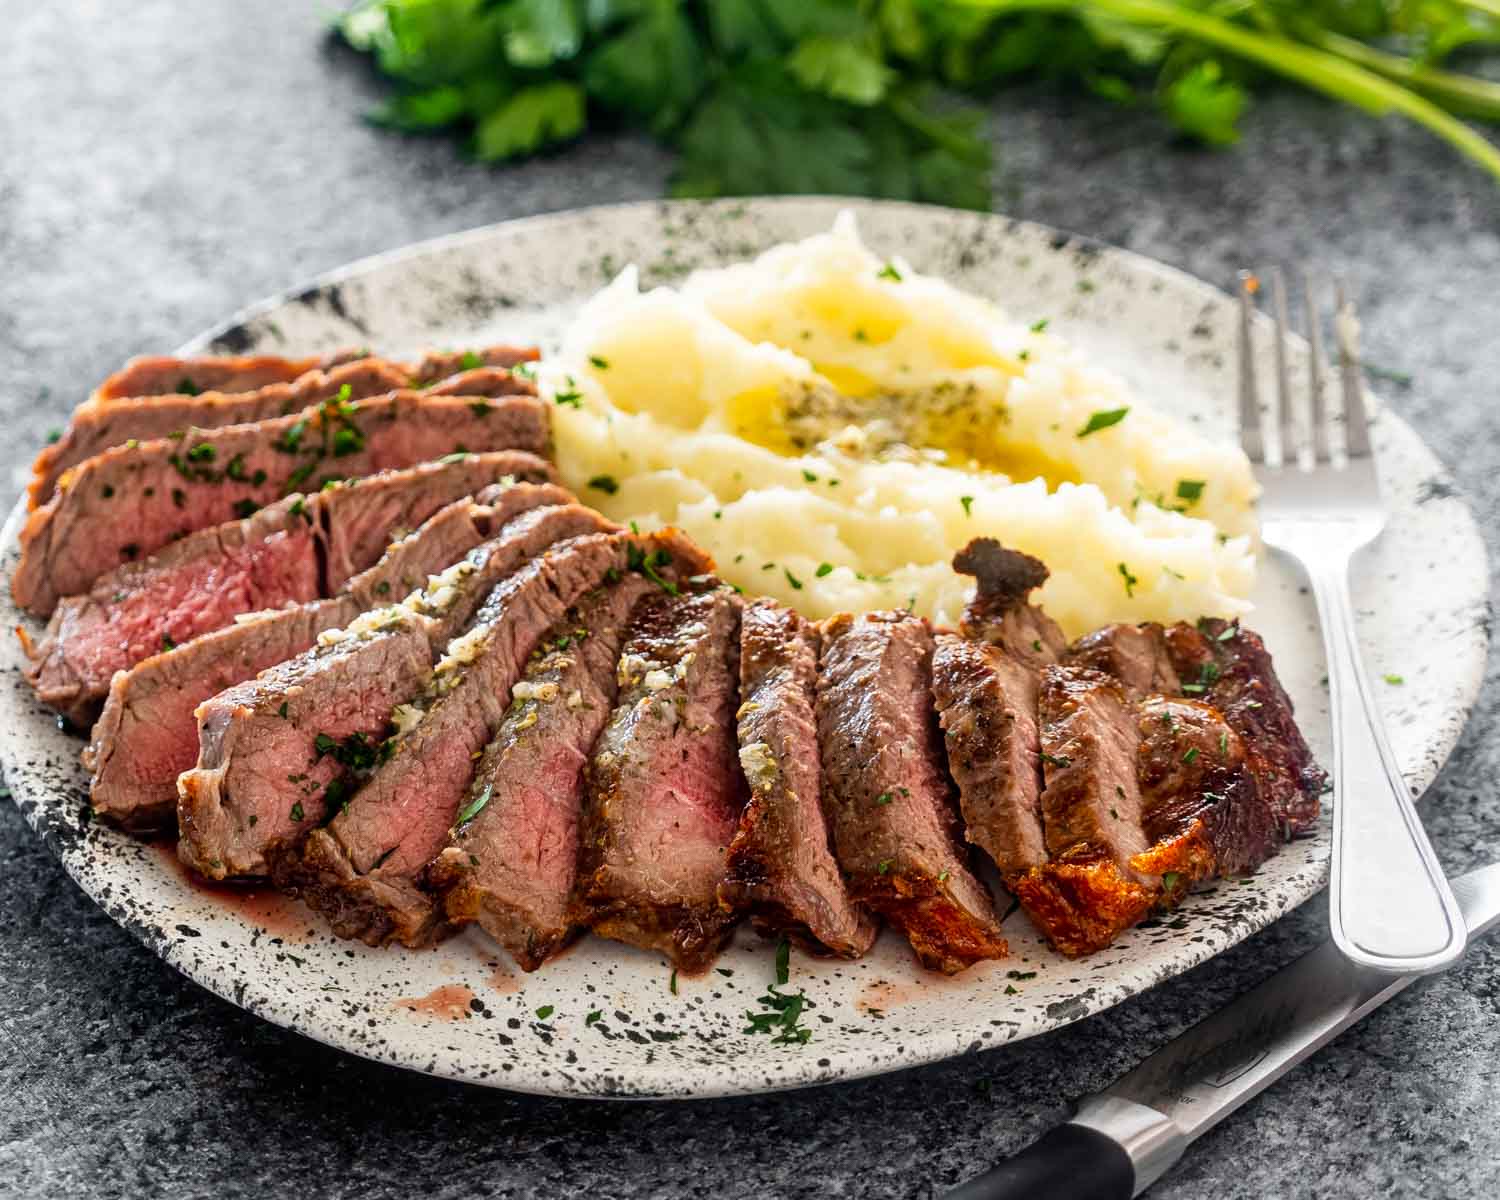 sliced up steak with mashed potatoes on a plate.